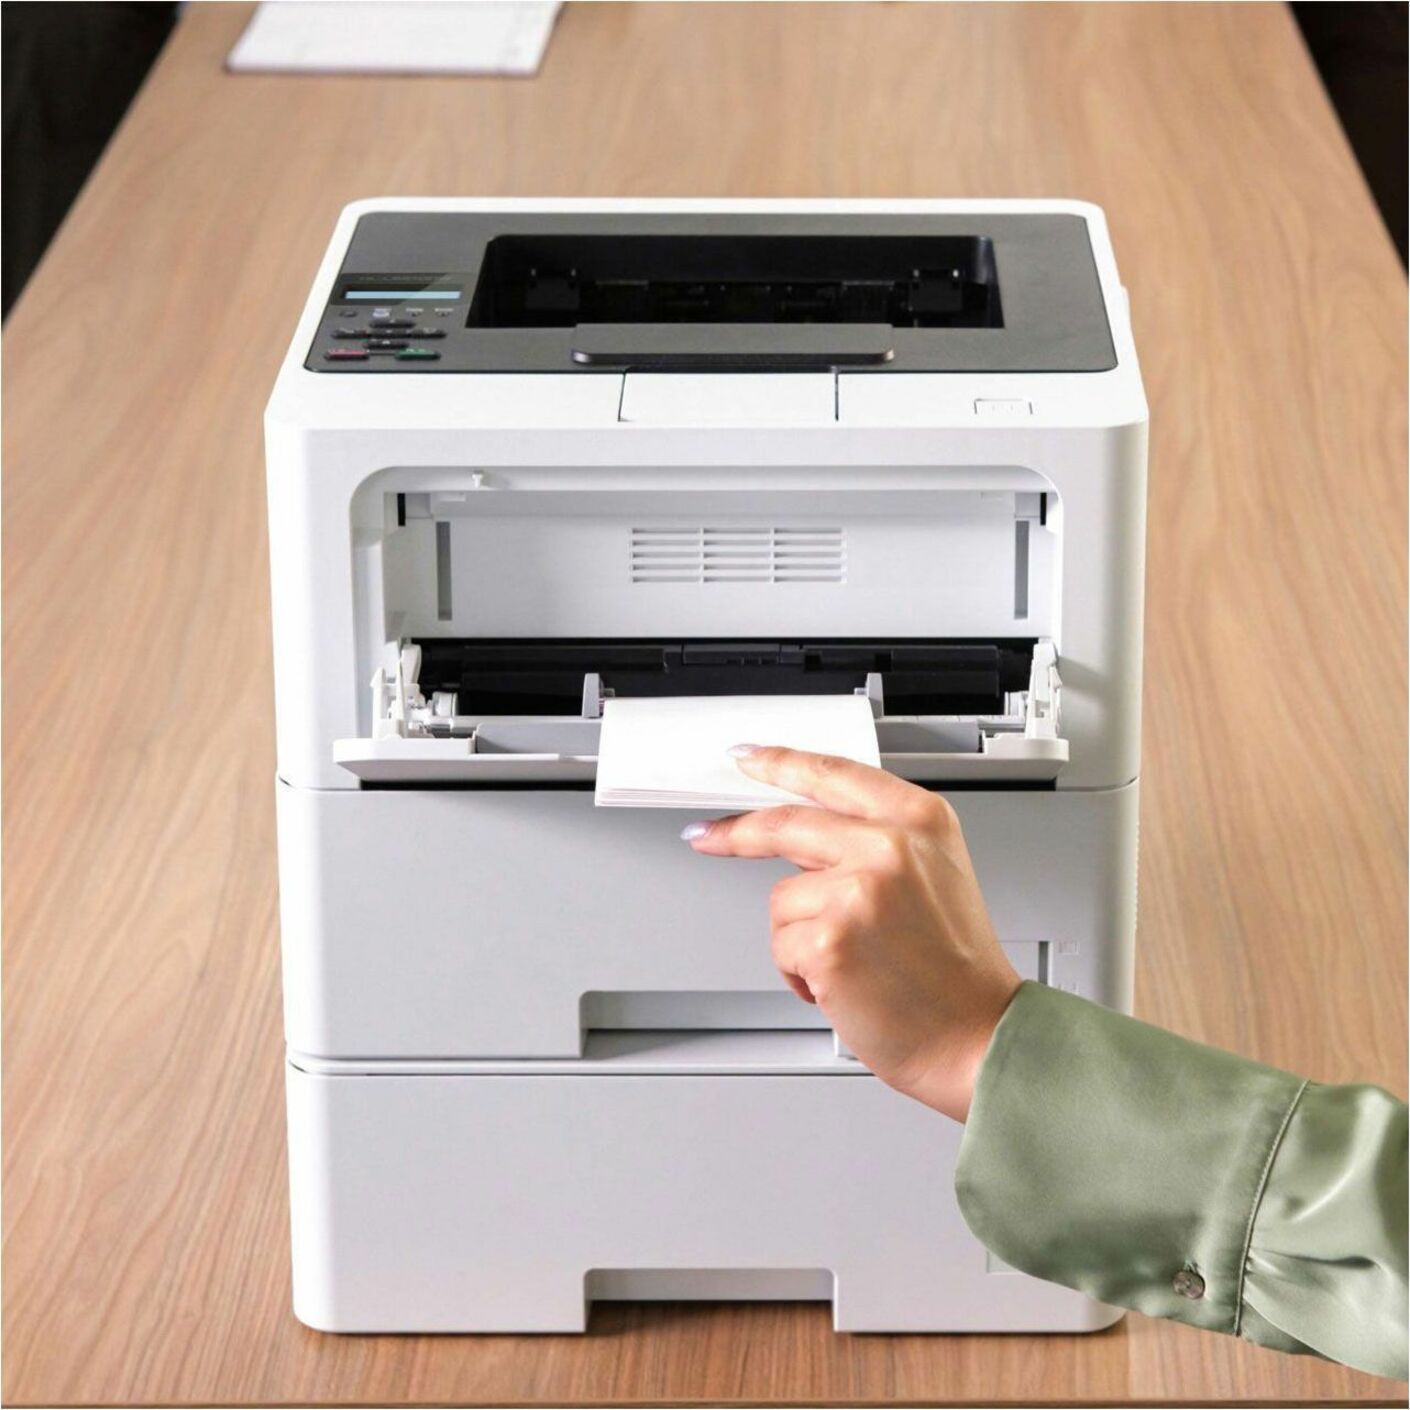 Brother HLL6210DWT HL-L6210DWT Business Monochrome Laser Printer, Dual Paper Trays, Wireless Networking, Duplex Printing